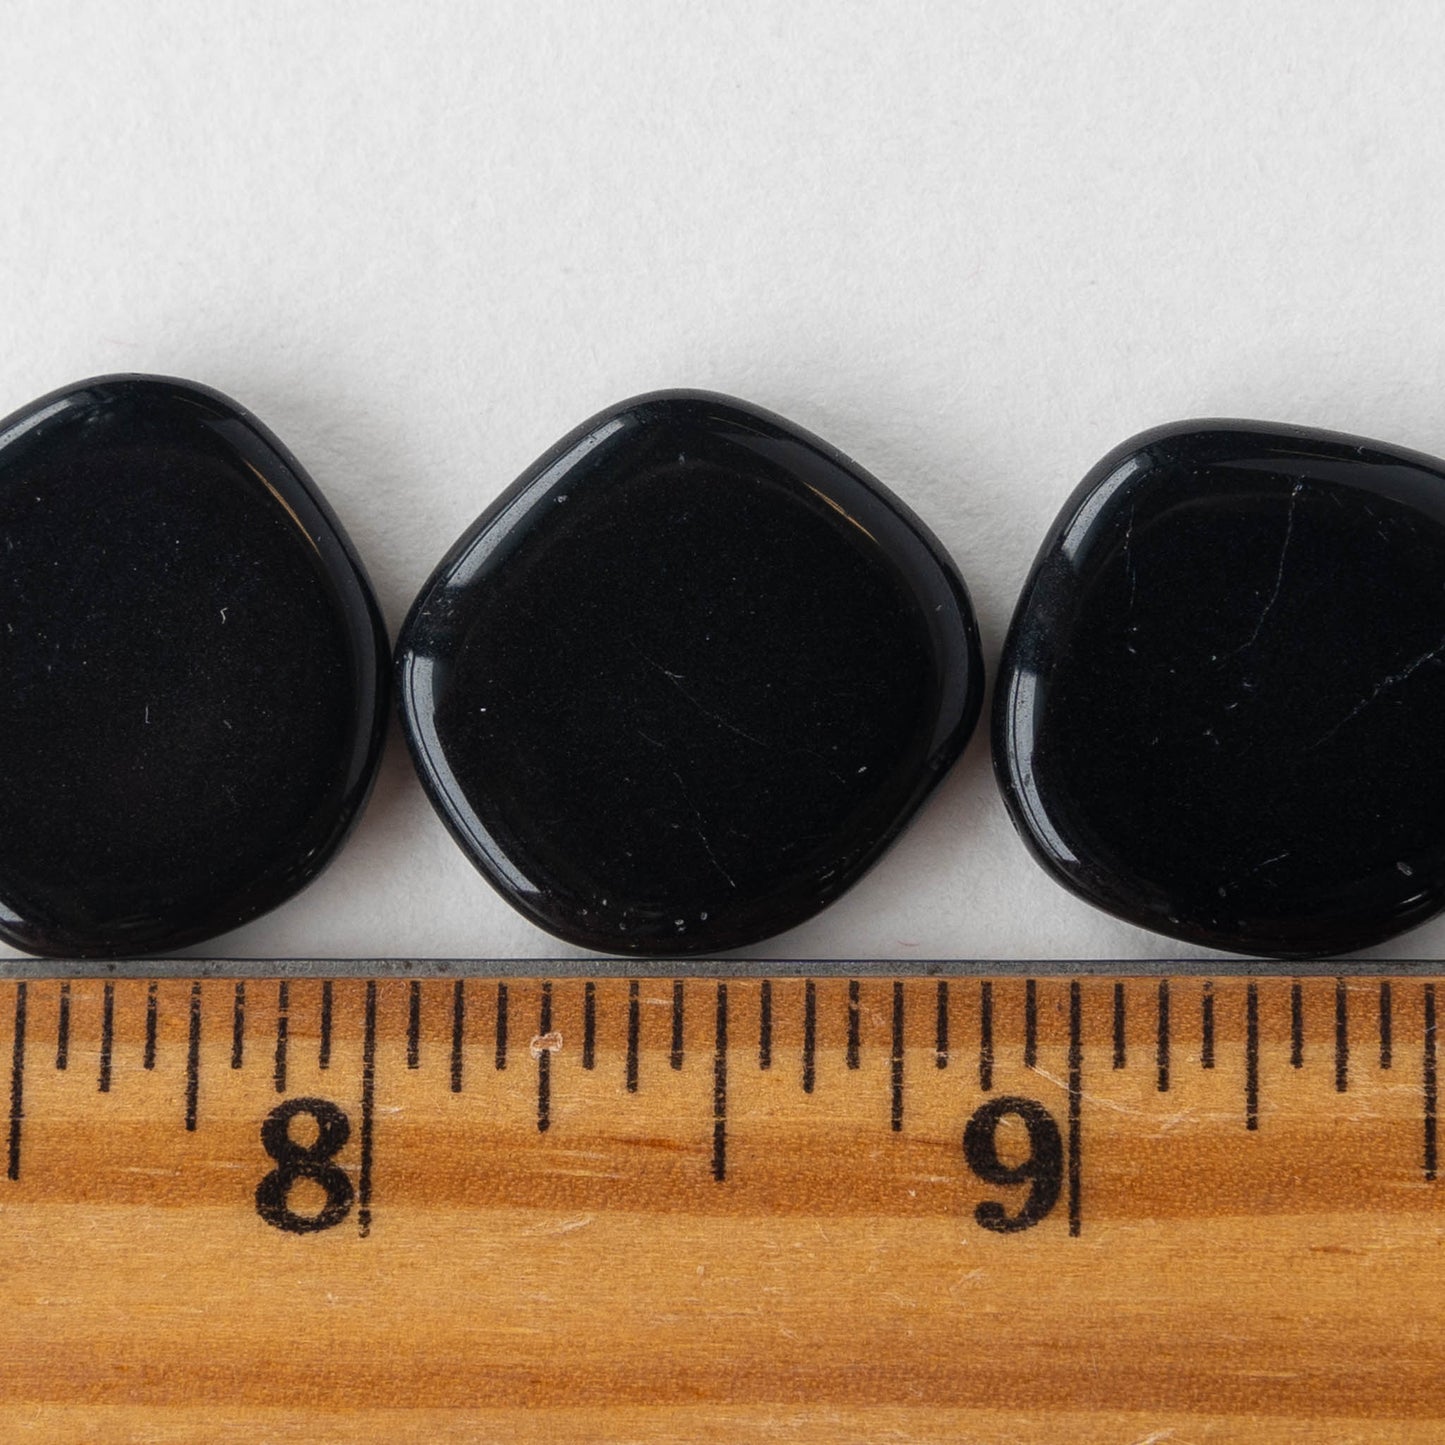 22mm Coin Beads - Opaque Black - 10 beads